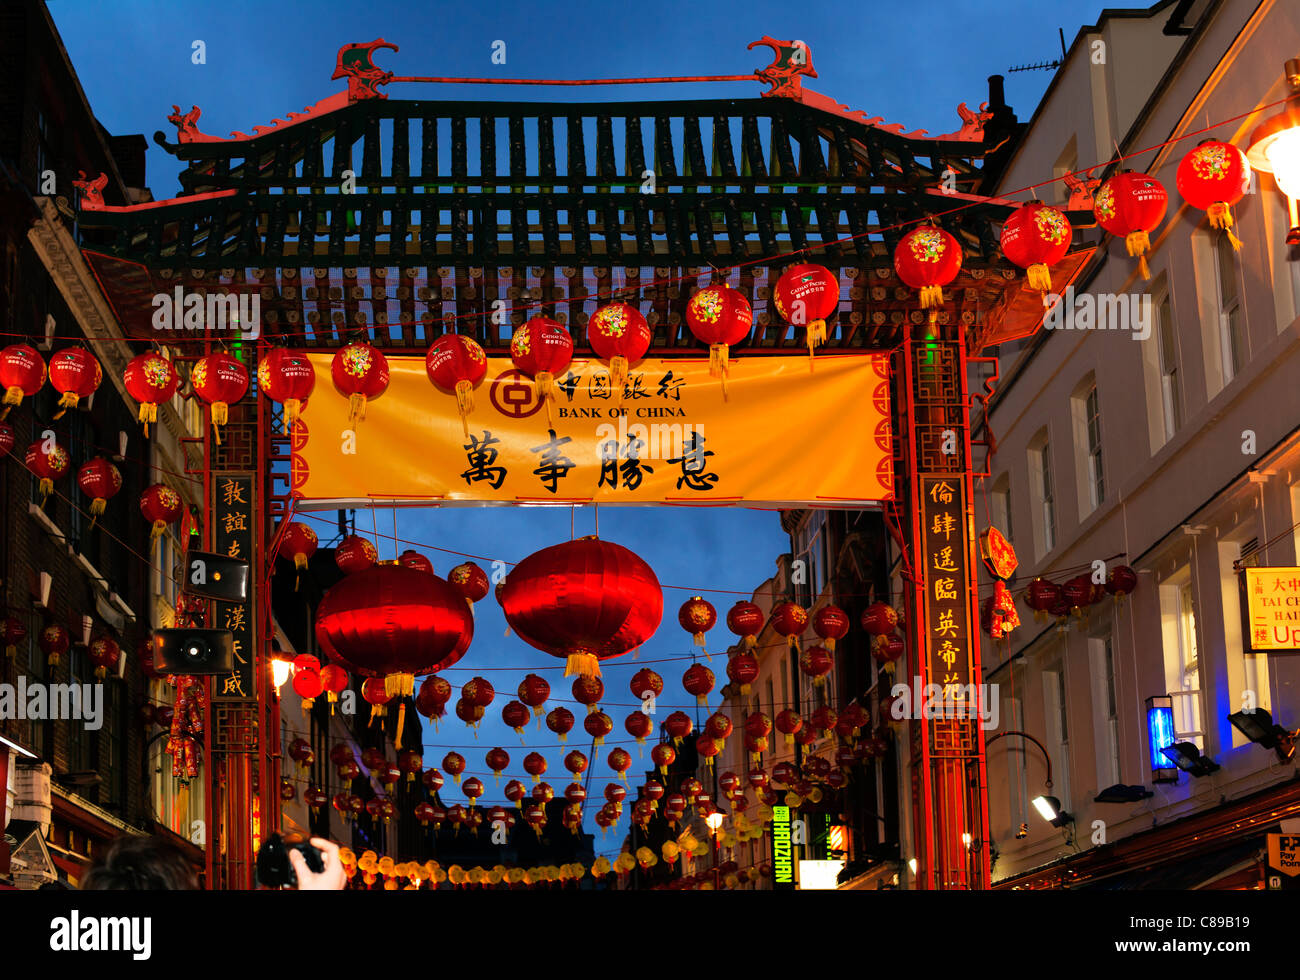 Chinese New Year celebrations decorations, Gerrard Street ...